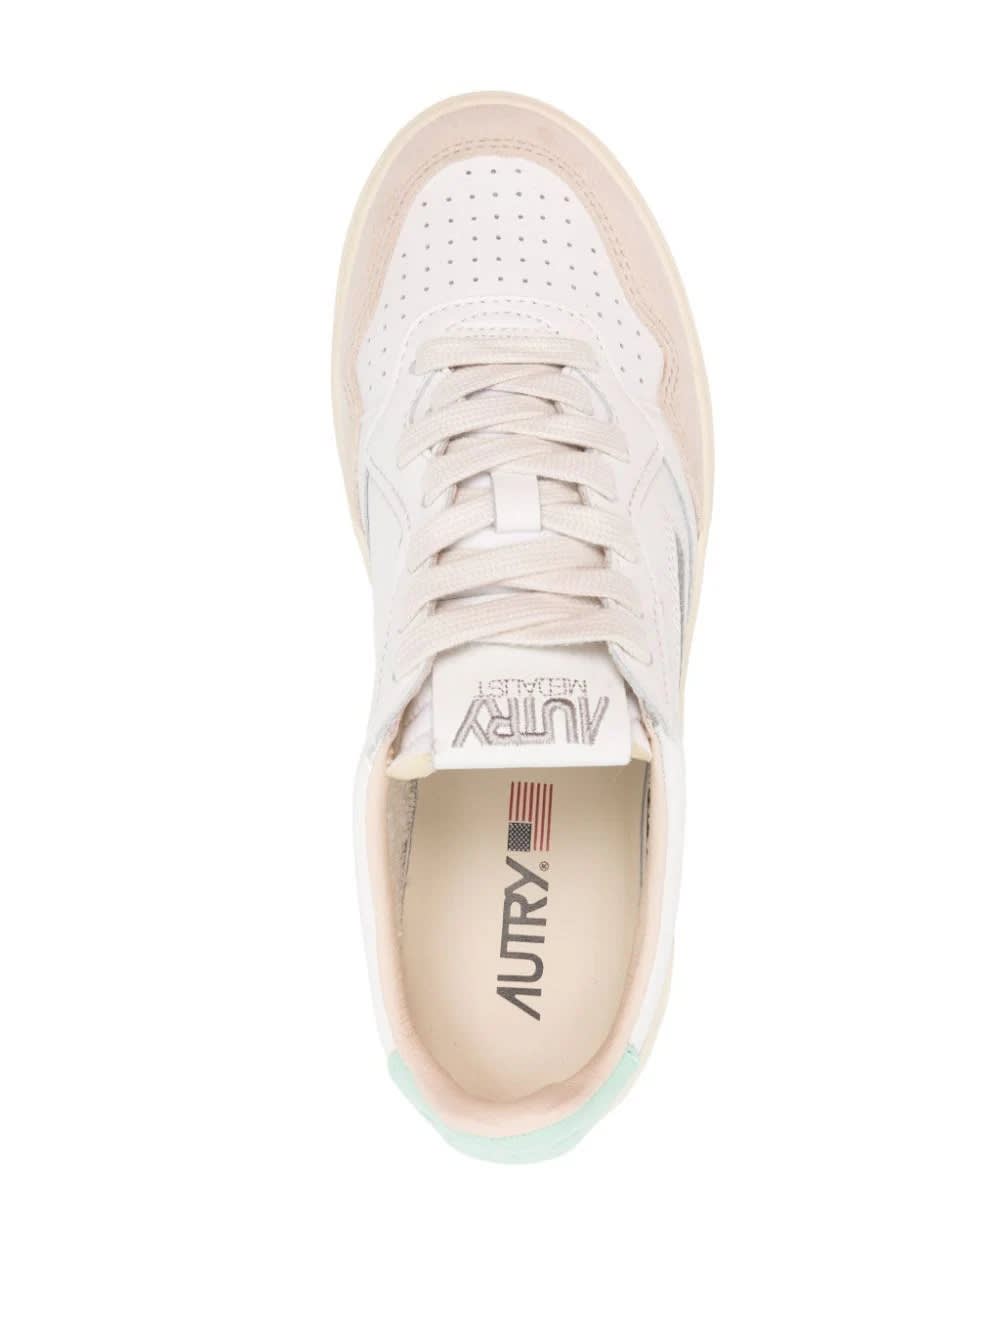 Shop Autry Medalist Low Sneakers In White And Aqua Green Suede And Leather